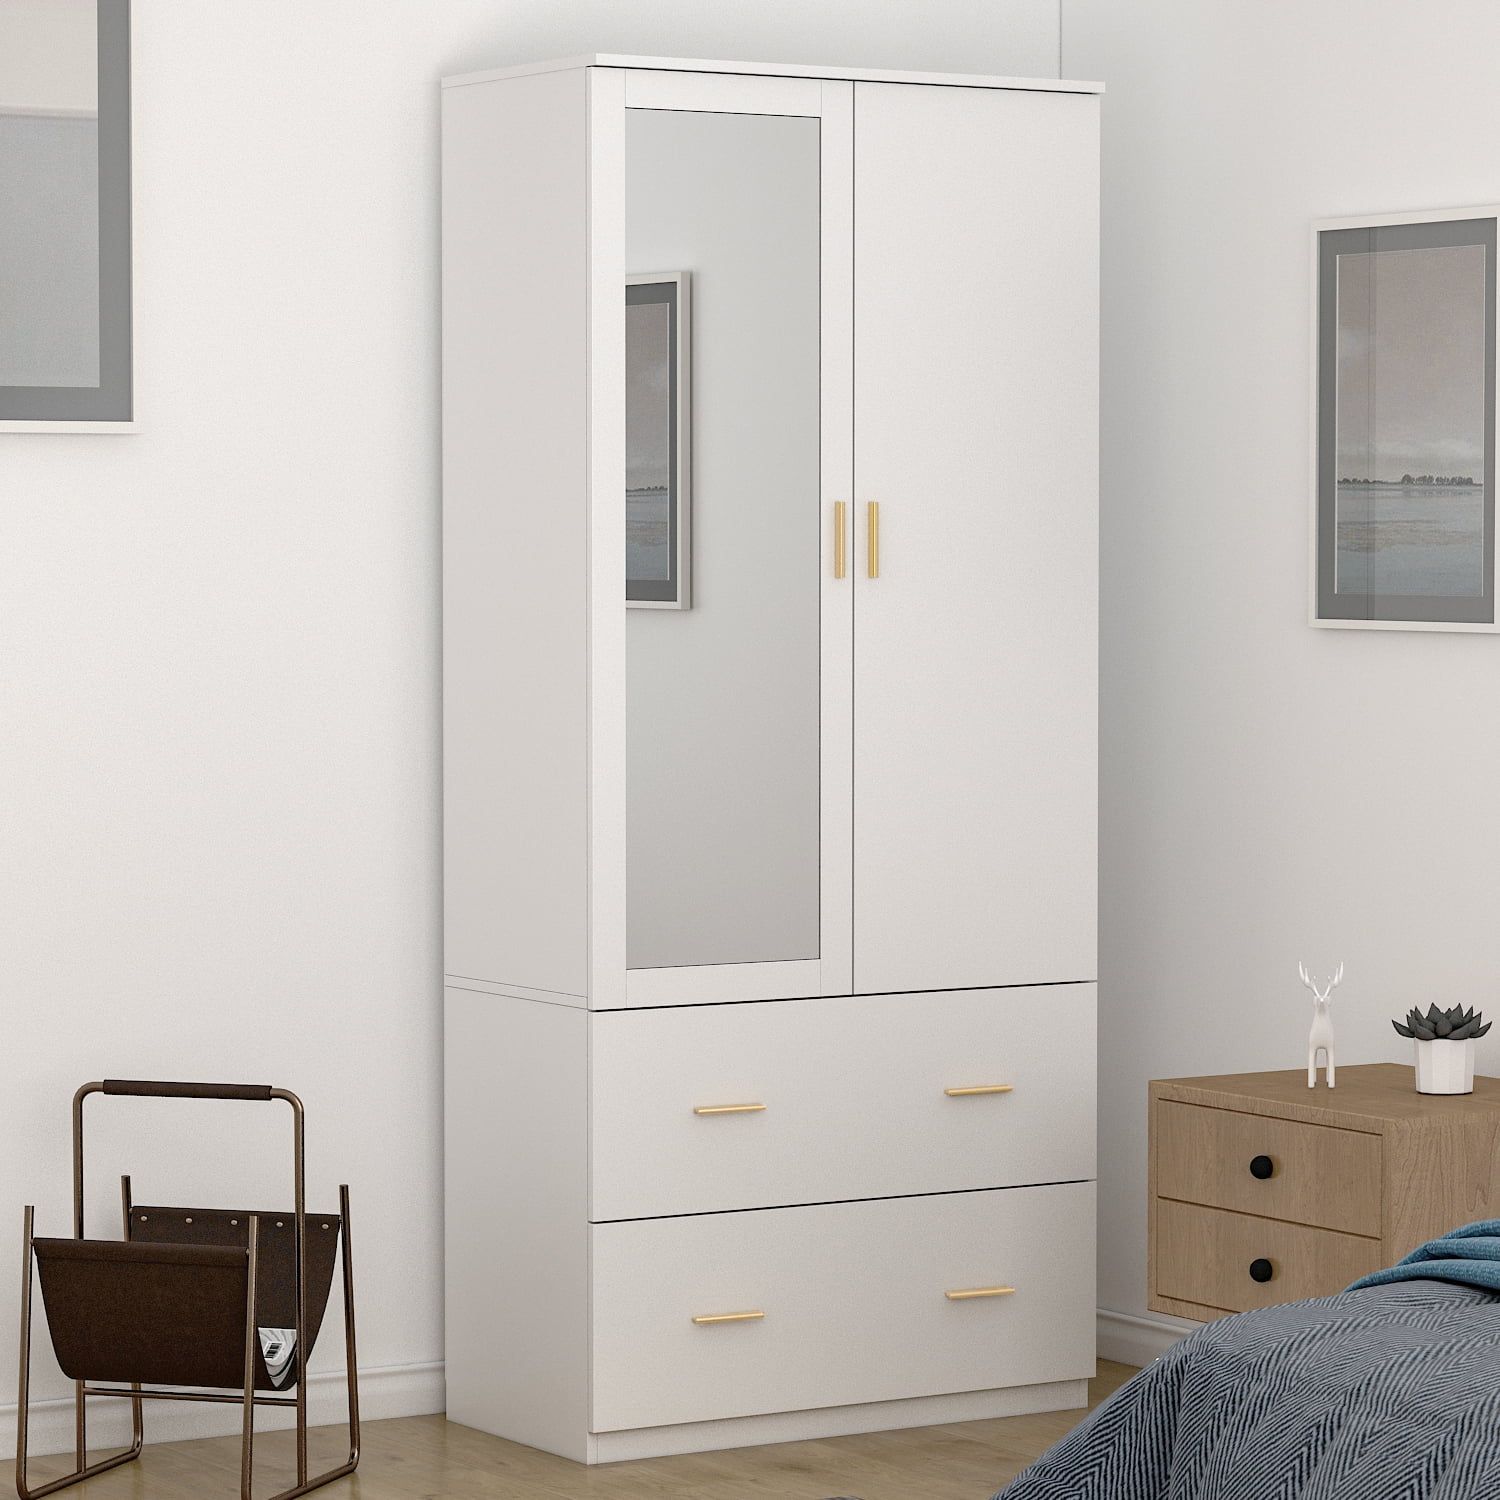 Didugo Armoire Wardrobe Closet With Mirror Doors And Hanging Rod For  Bedroom White – Walmart Throughout Single White Wardrobes With Mirror (View 14 of 15)